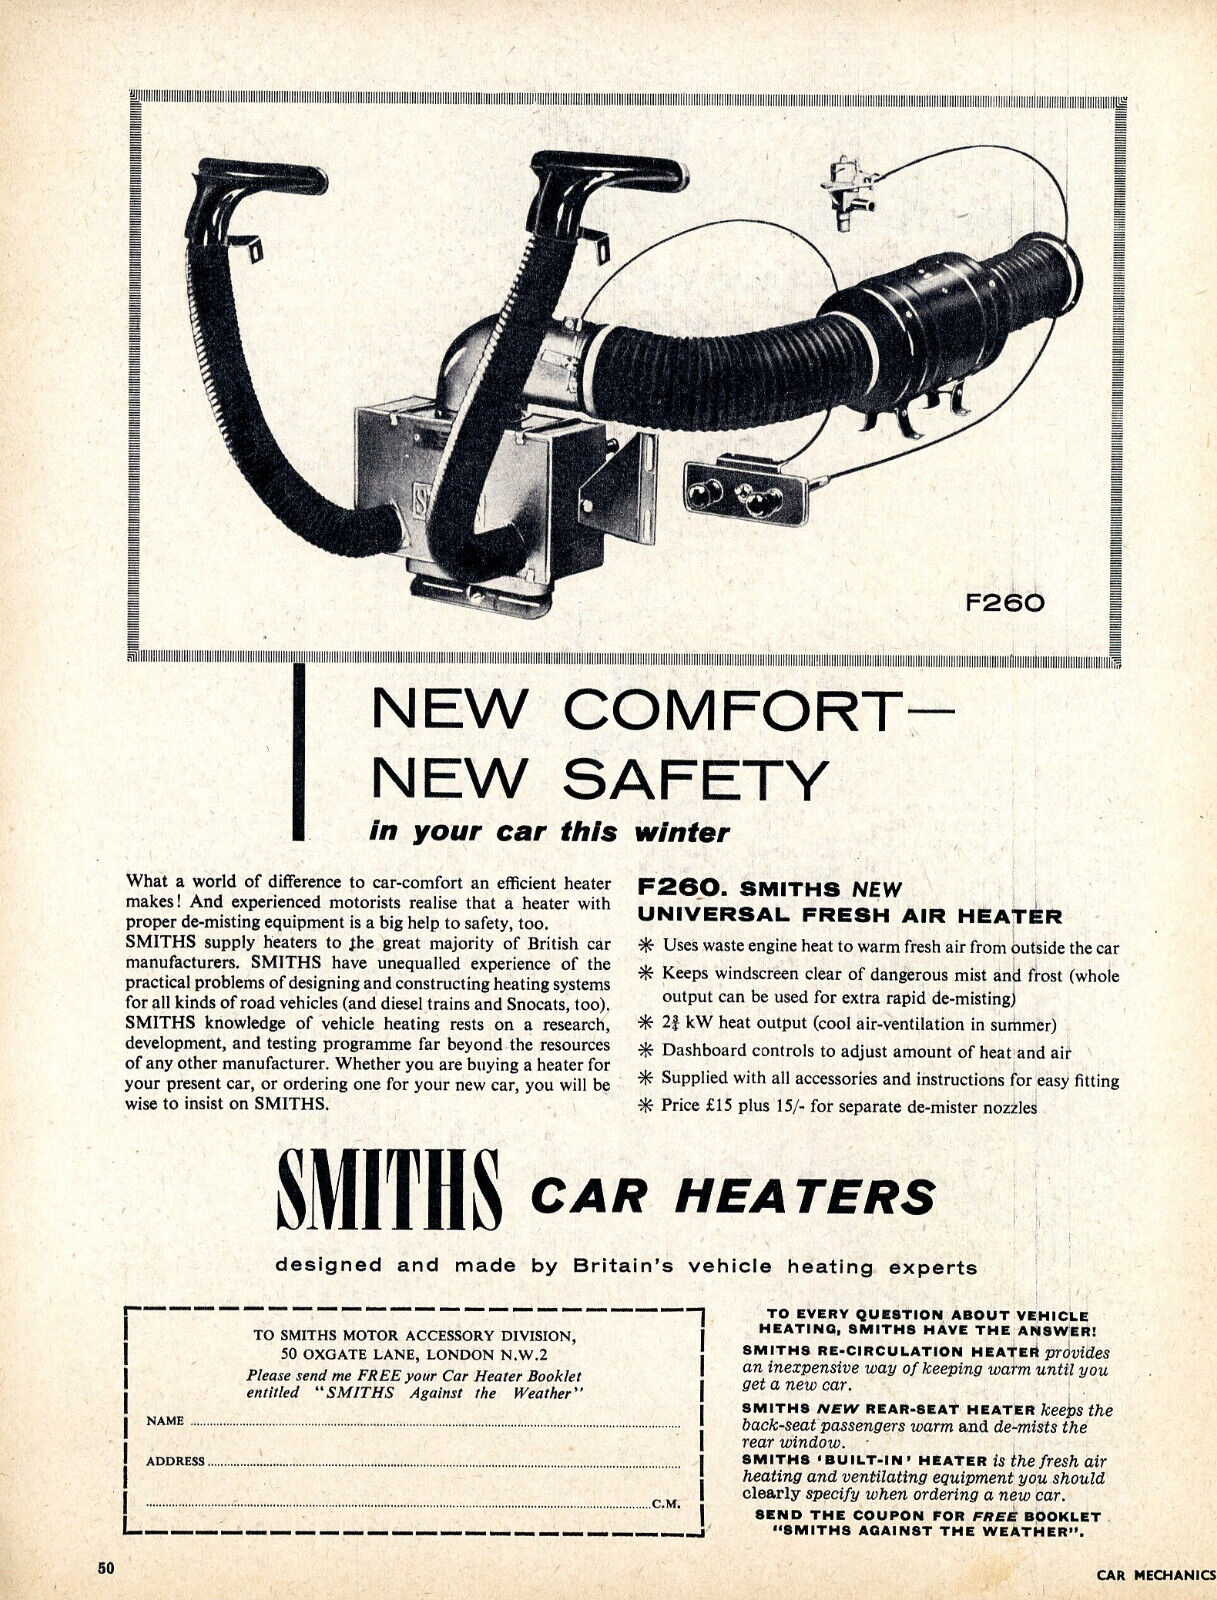 Smiths Fresh air Car Heater F260 with price 1958 advert de-mister nozzles extra